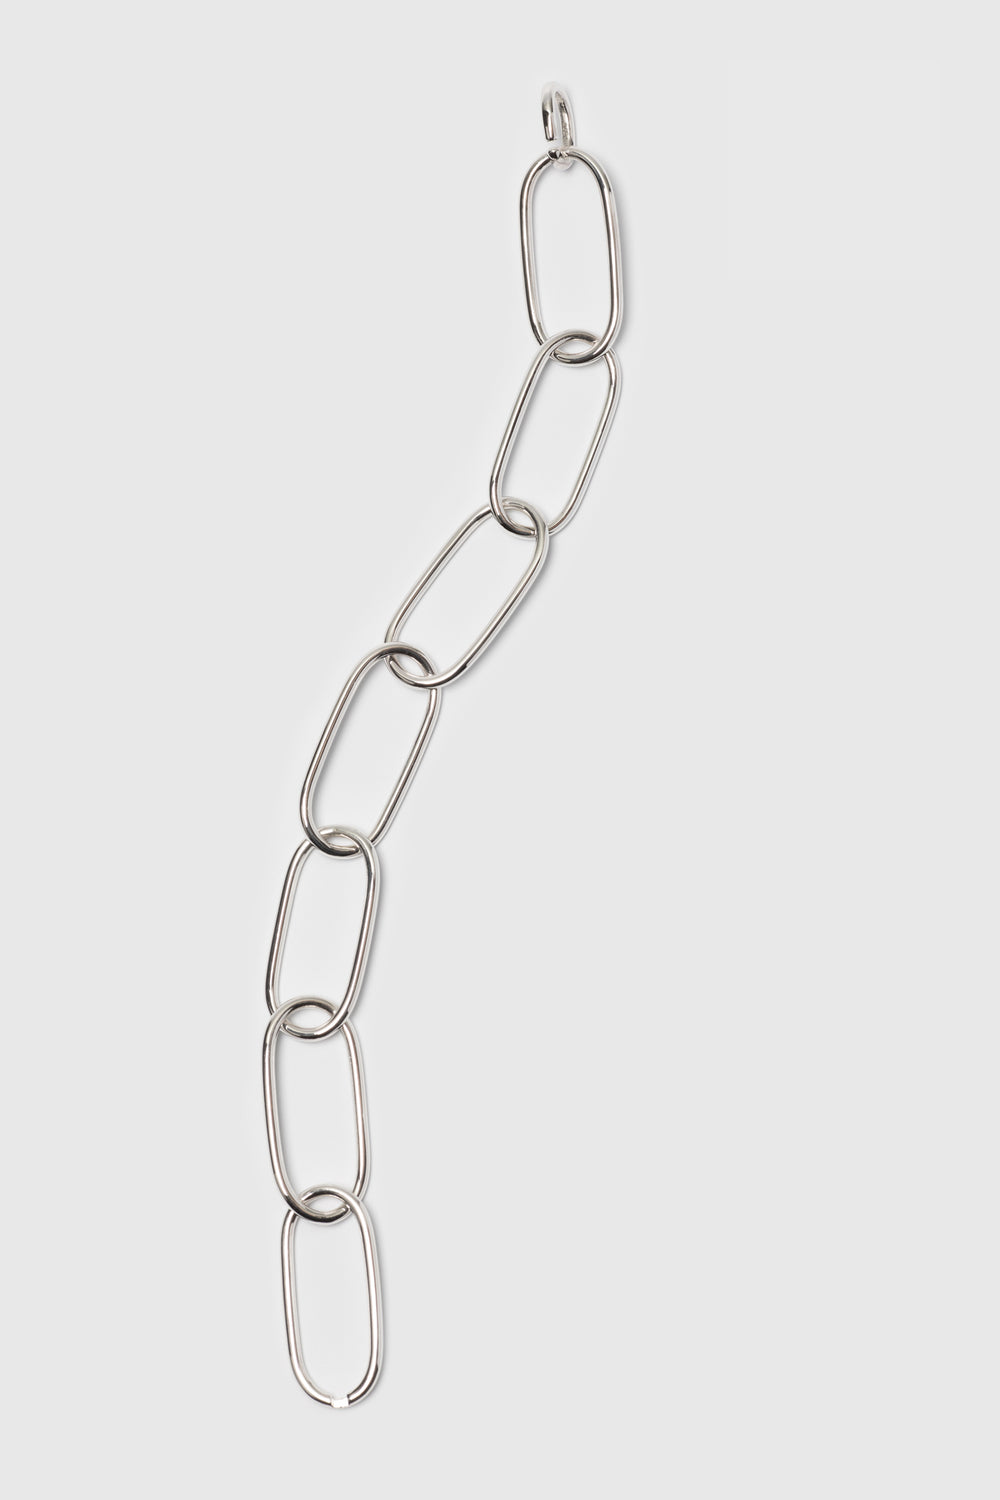 Statement bracelet made from bold link chains with a high gloss finish. Silver jewelry handmade in Berlin.